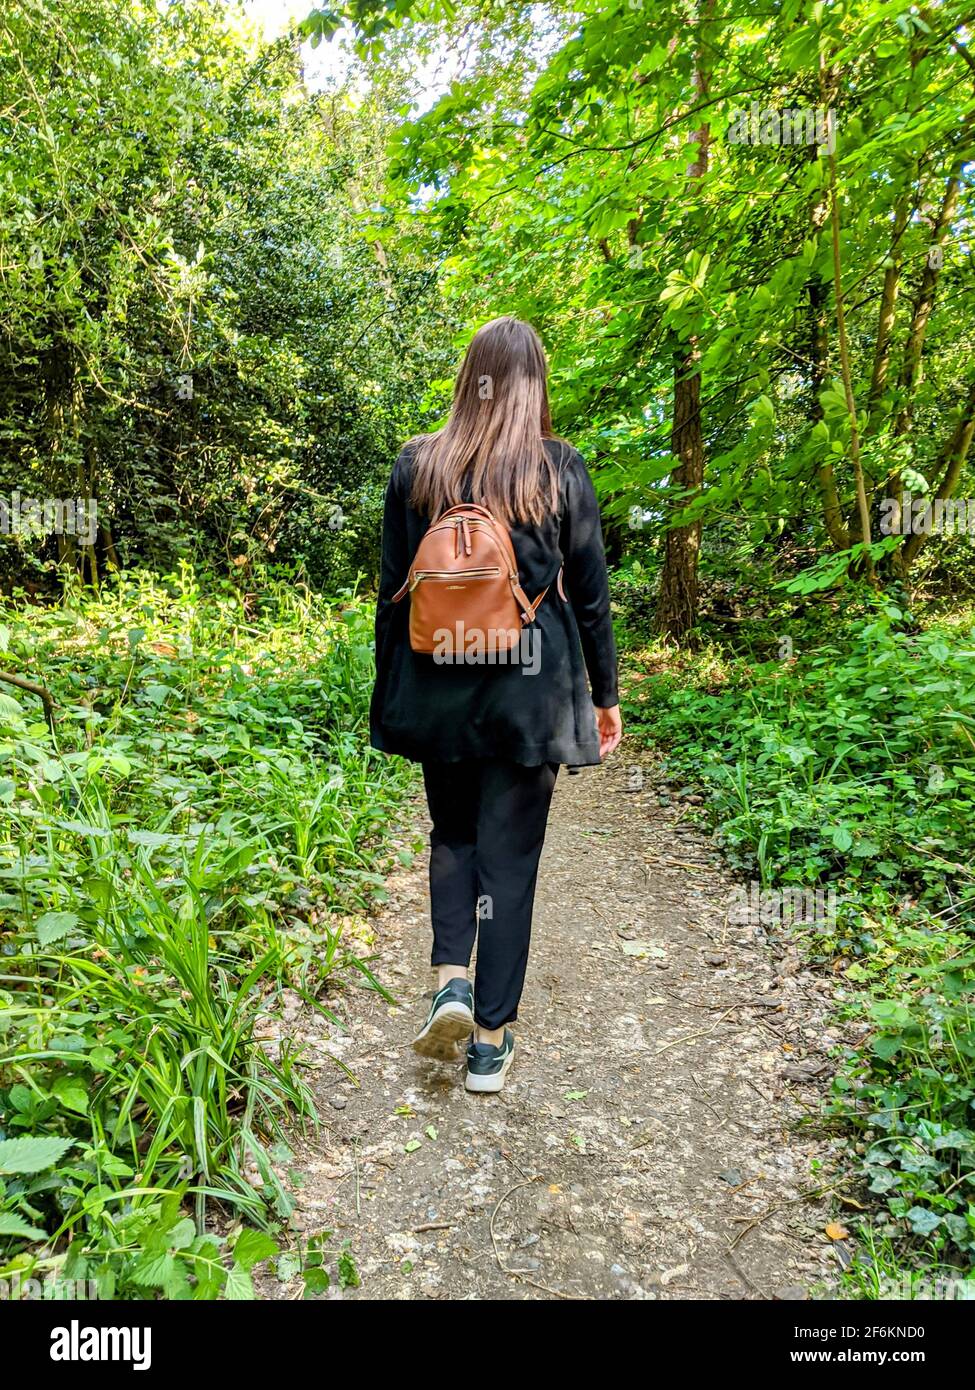 A brunette woman walking away down a woodland path surrounded by green shrubbery, bushes and trees on Hampstead Heath, London, U.K. Stock Photo